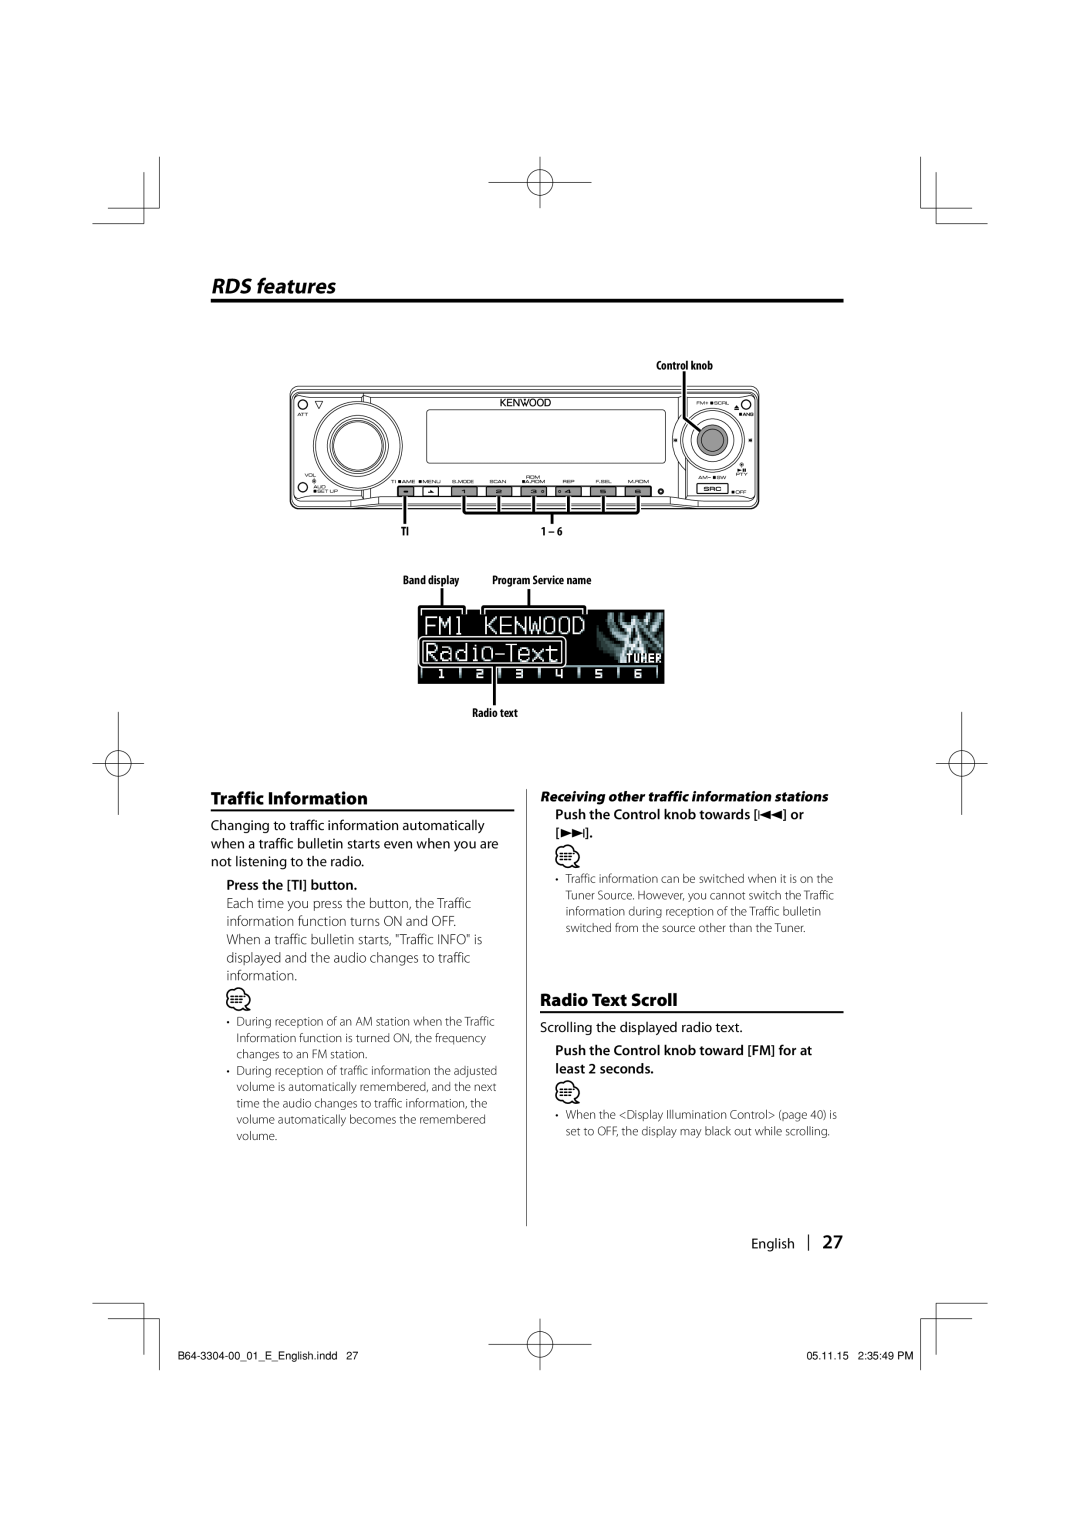 Dolby Laboratories KDC-W8534 RDS features, Traffic Information, Radio Text Scroll, Press the TI button, Control knob 